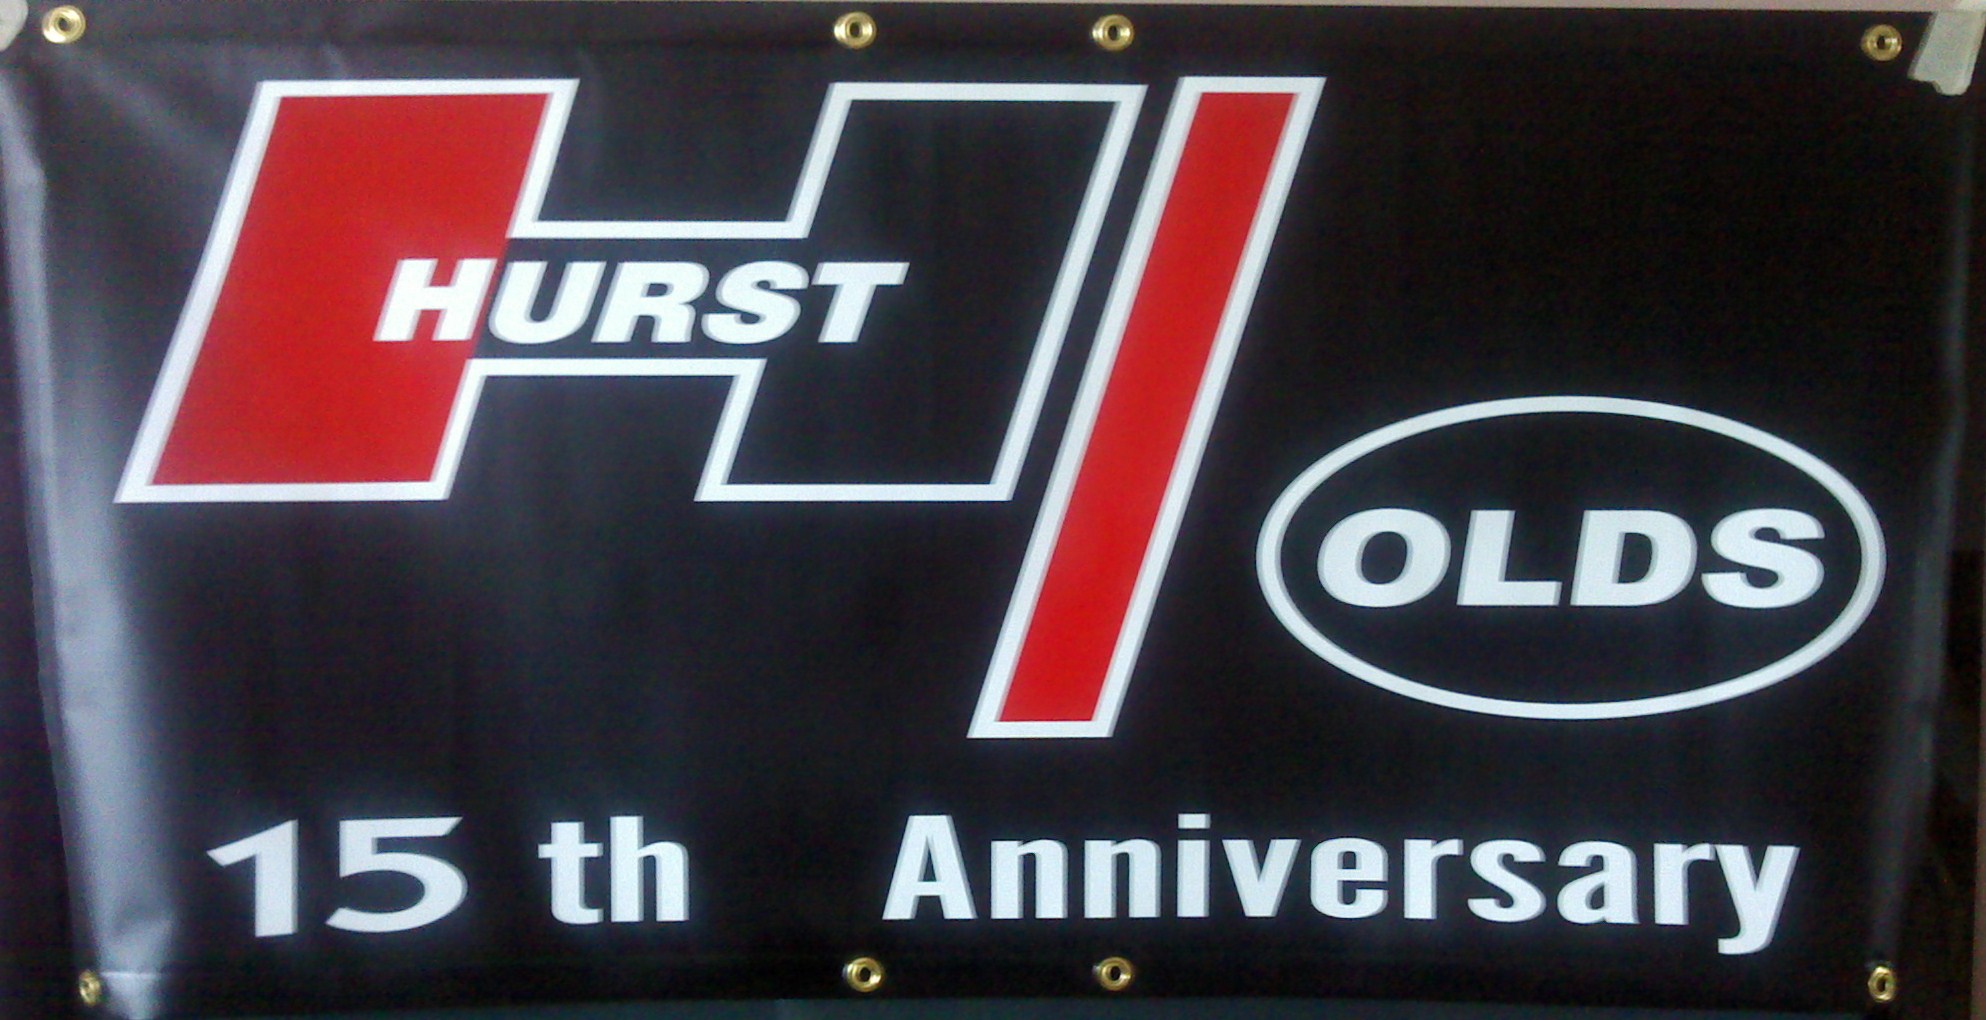 Hurst Olds 15th Anniversary premium 13 oz vinyl banner, black with red, black and silver lettering 2 FT x 4 FT